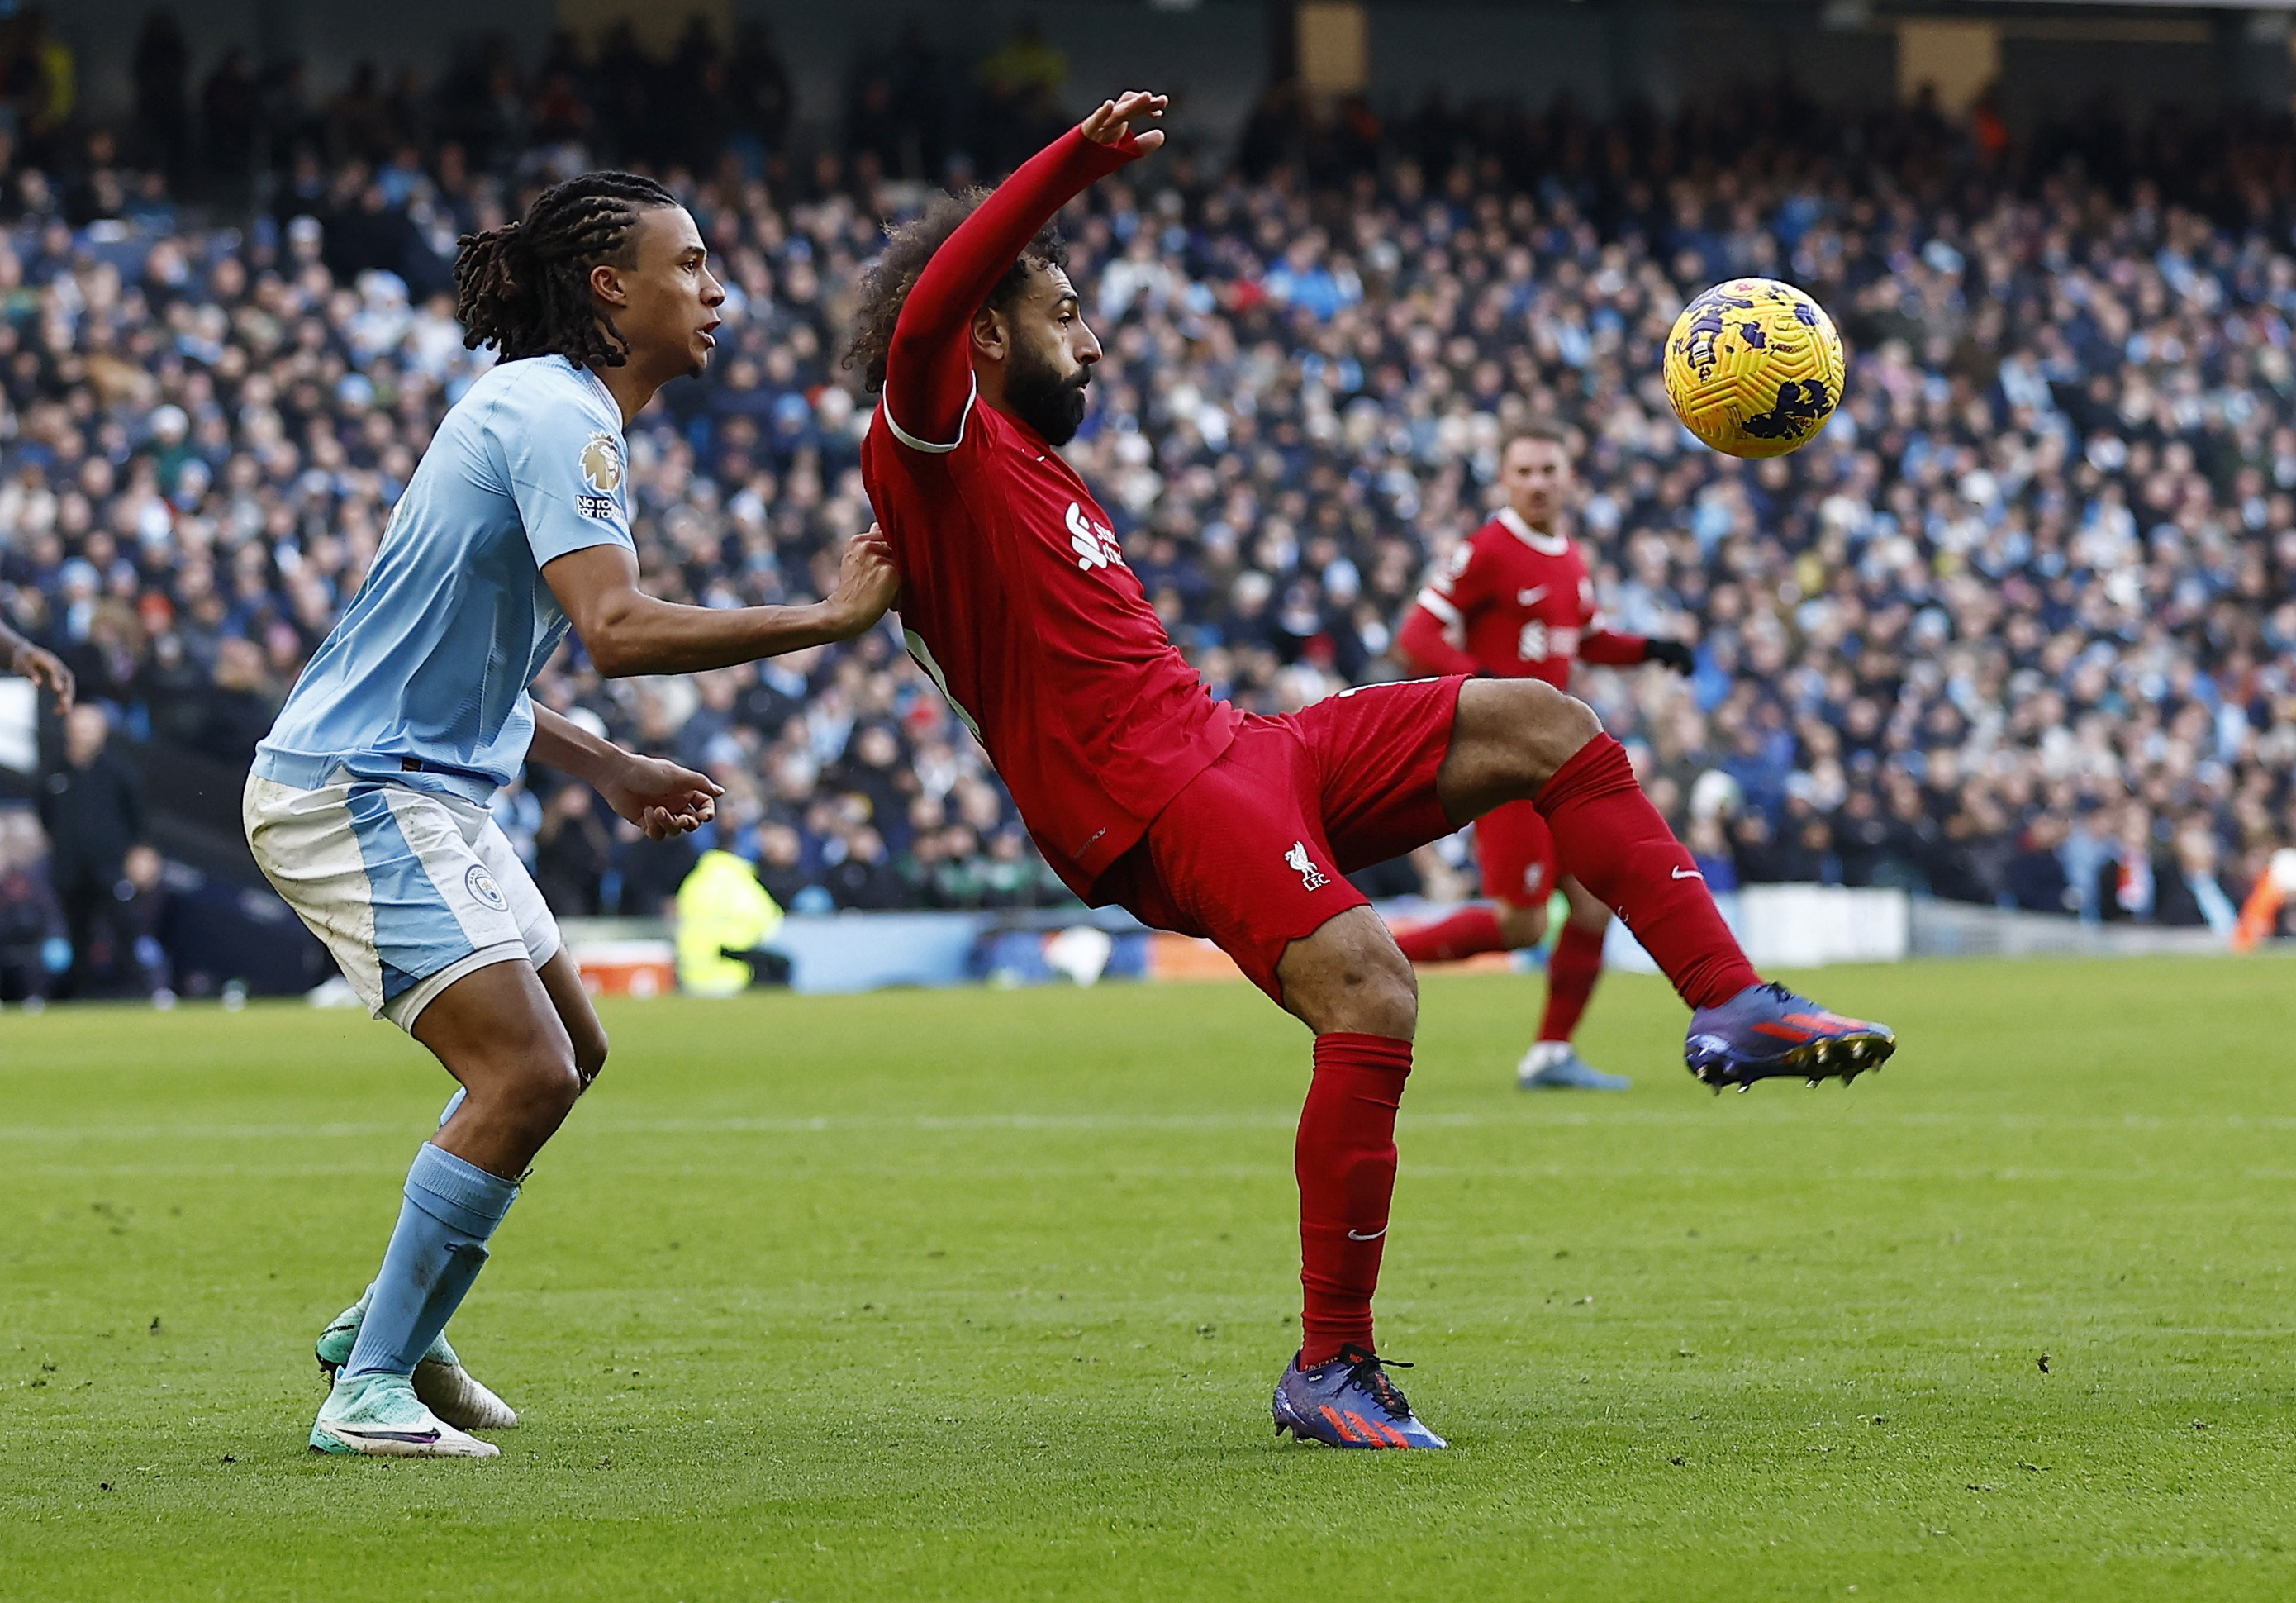 Liverpool grab 1-1 draw with Manchester City in top-of-the-table